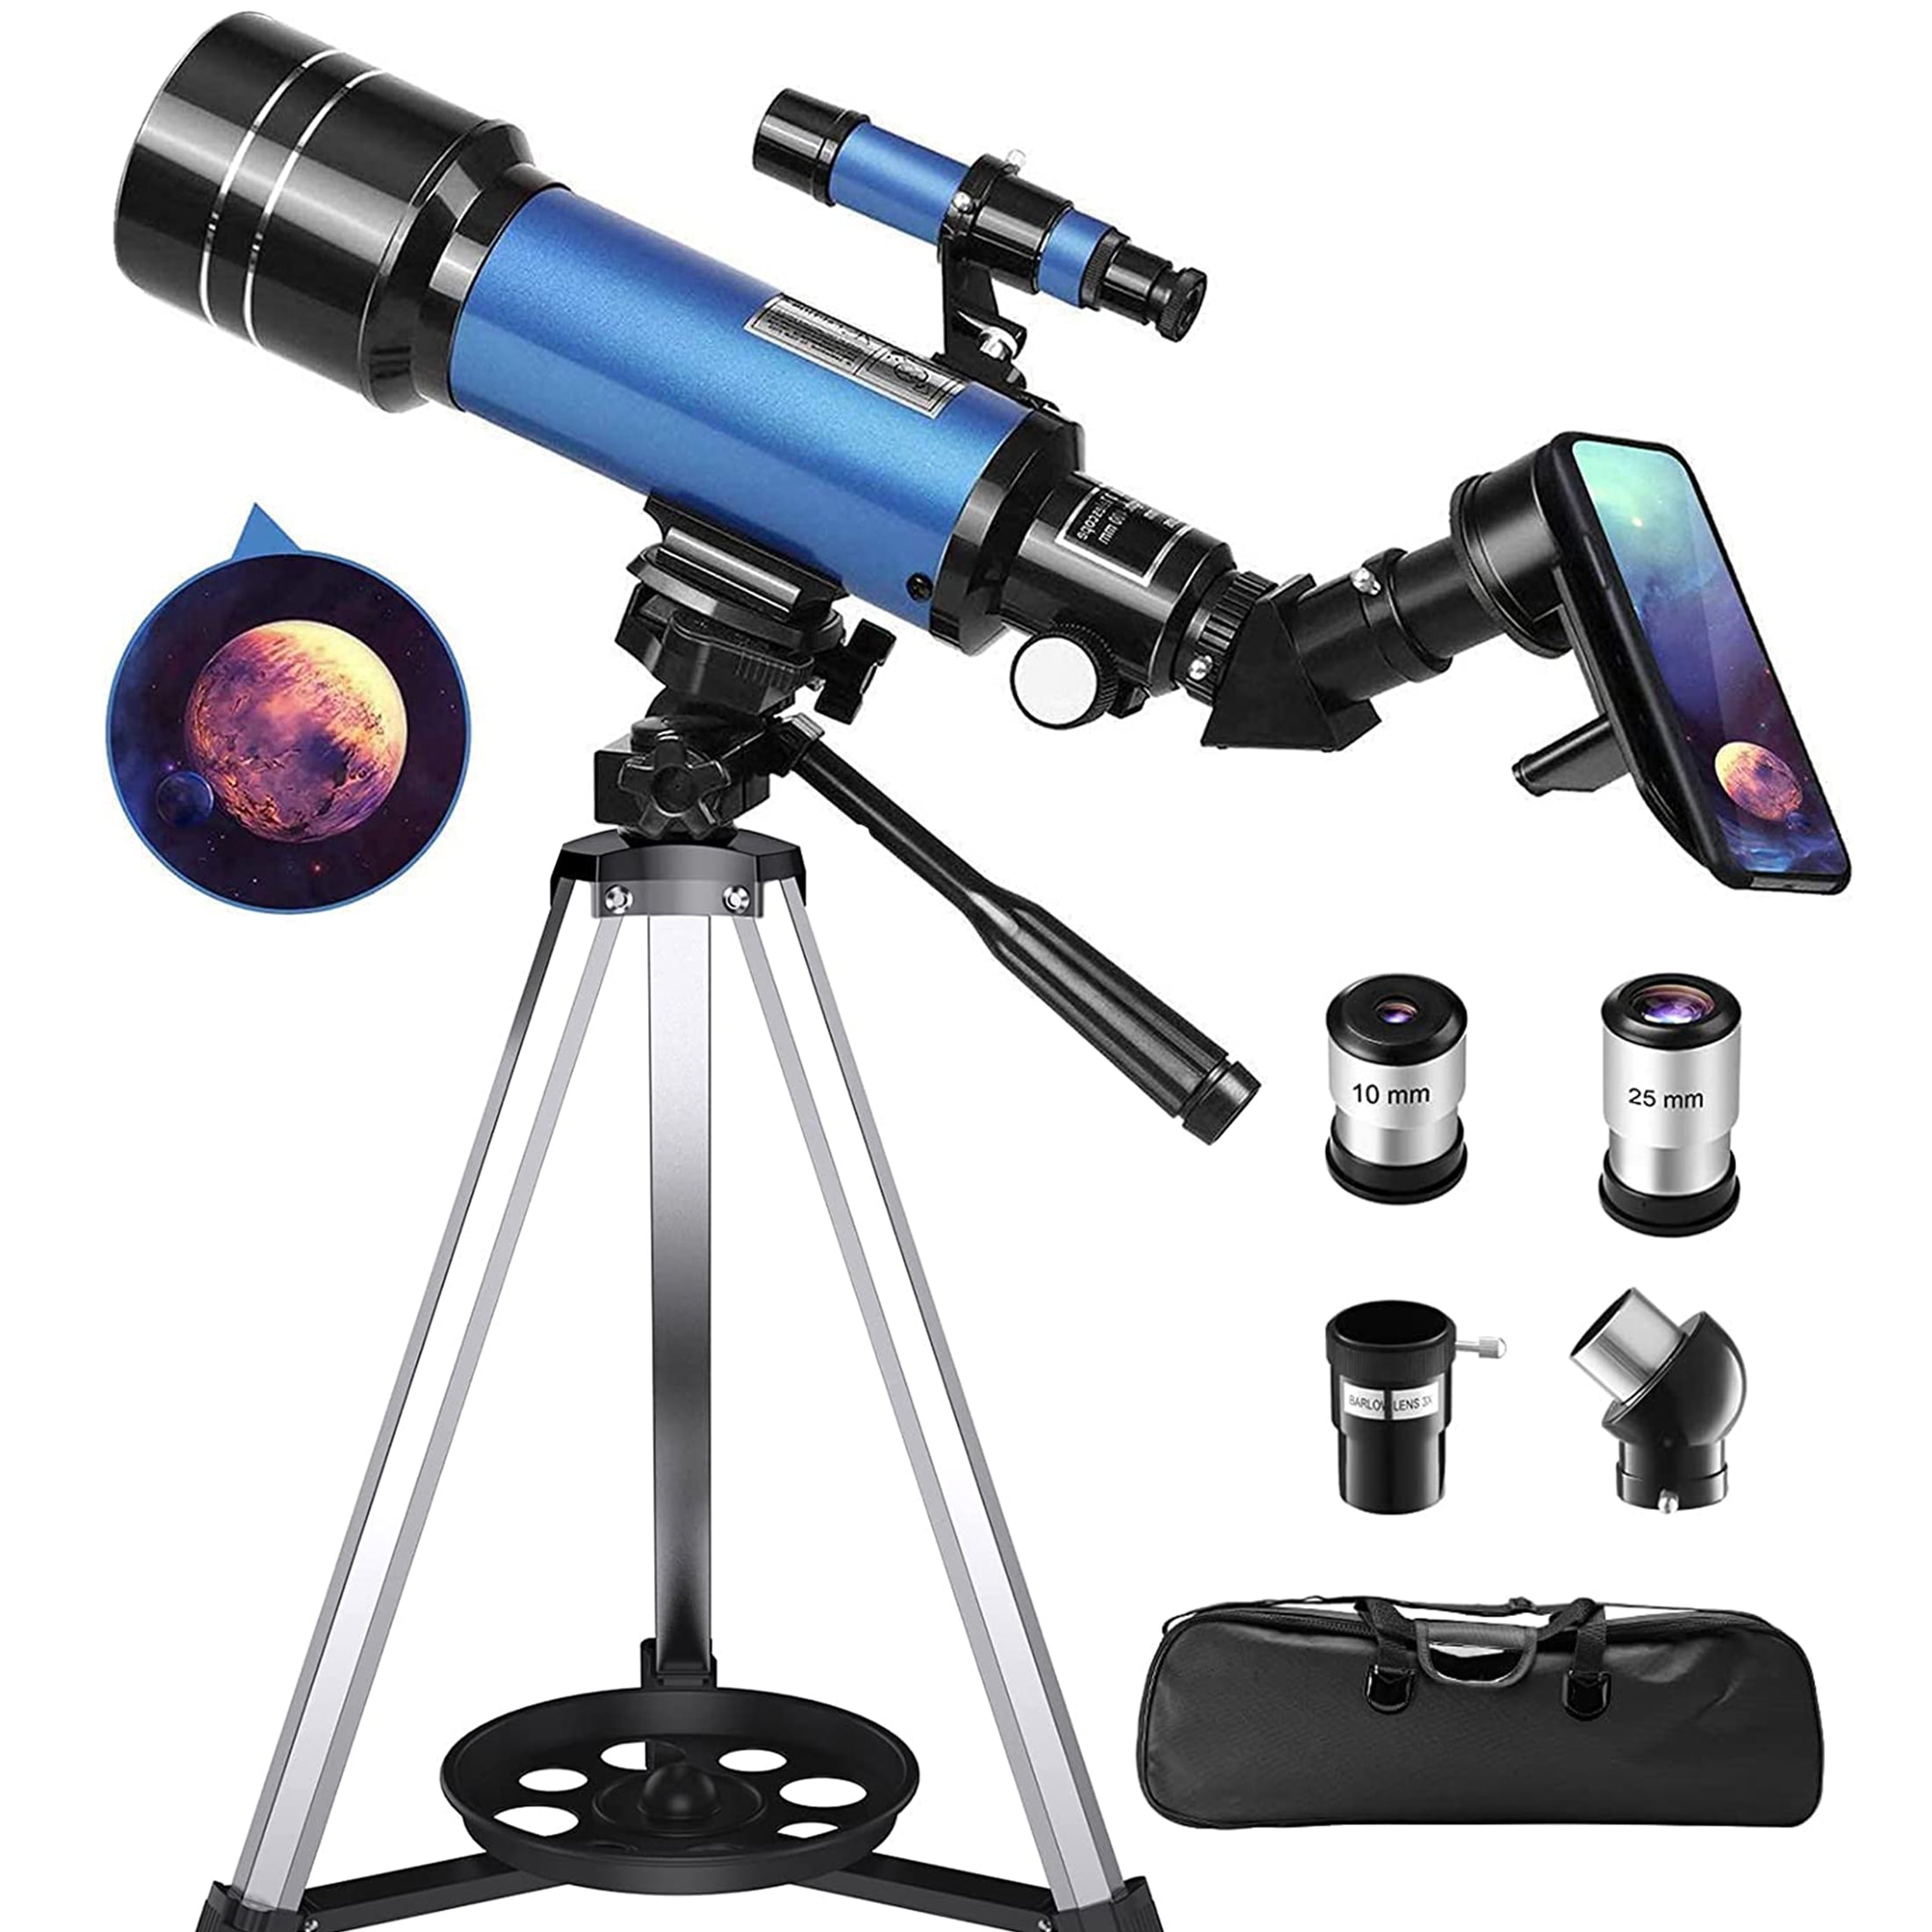 Good Travel Telescope with Backpack for Kids and Beginners Telescope for Kids 70mm Apeture Travel Scope 400mm AZ Mount Good Partner to View Moon and Planet 